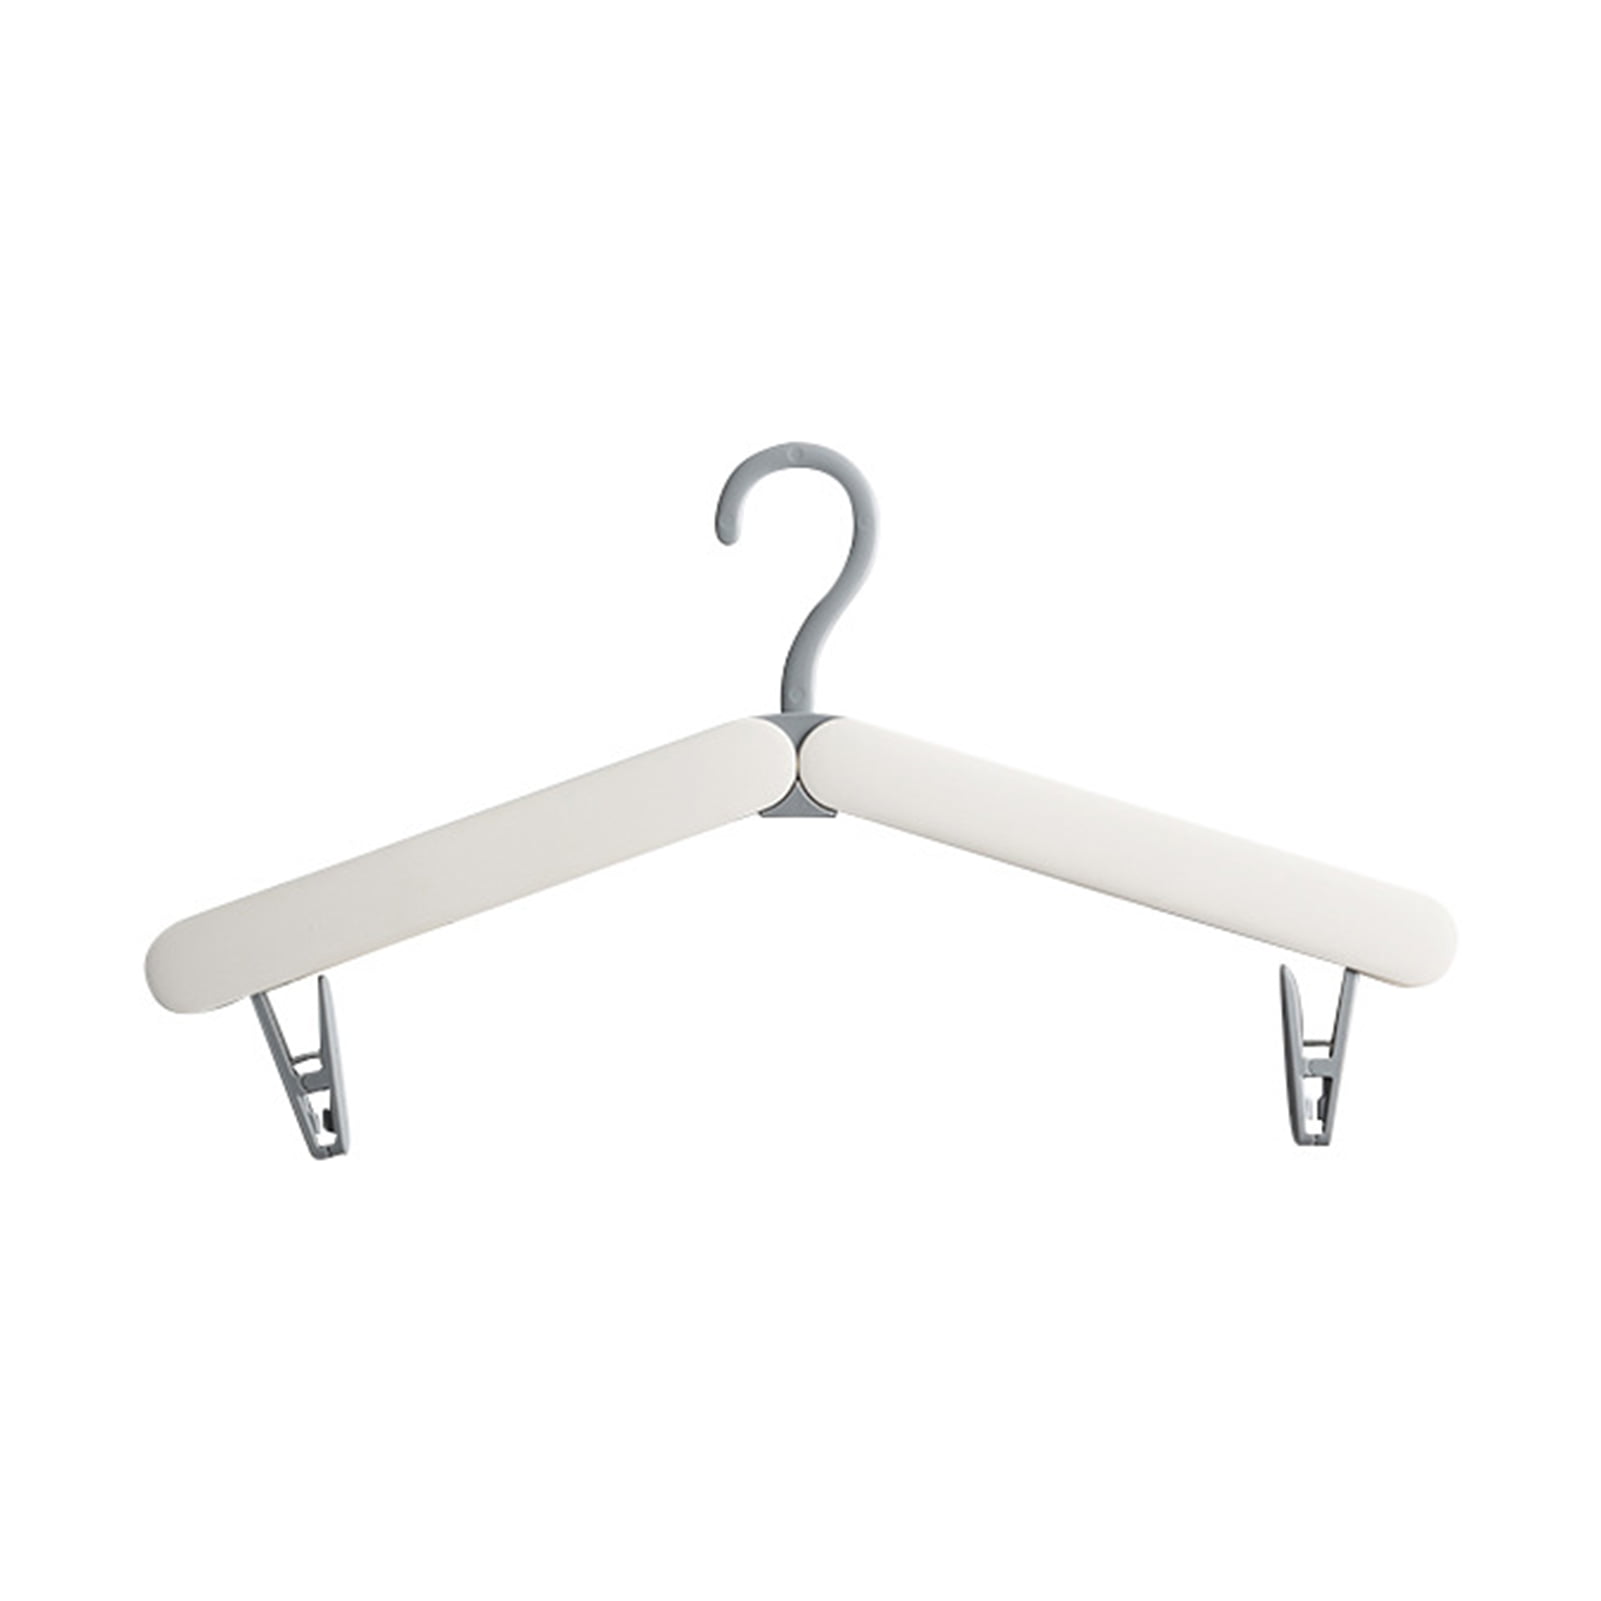 The Hanger Store 2 Pack Premium Frosted Jacket Coat Hangers